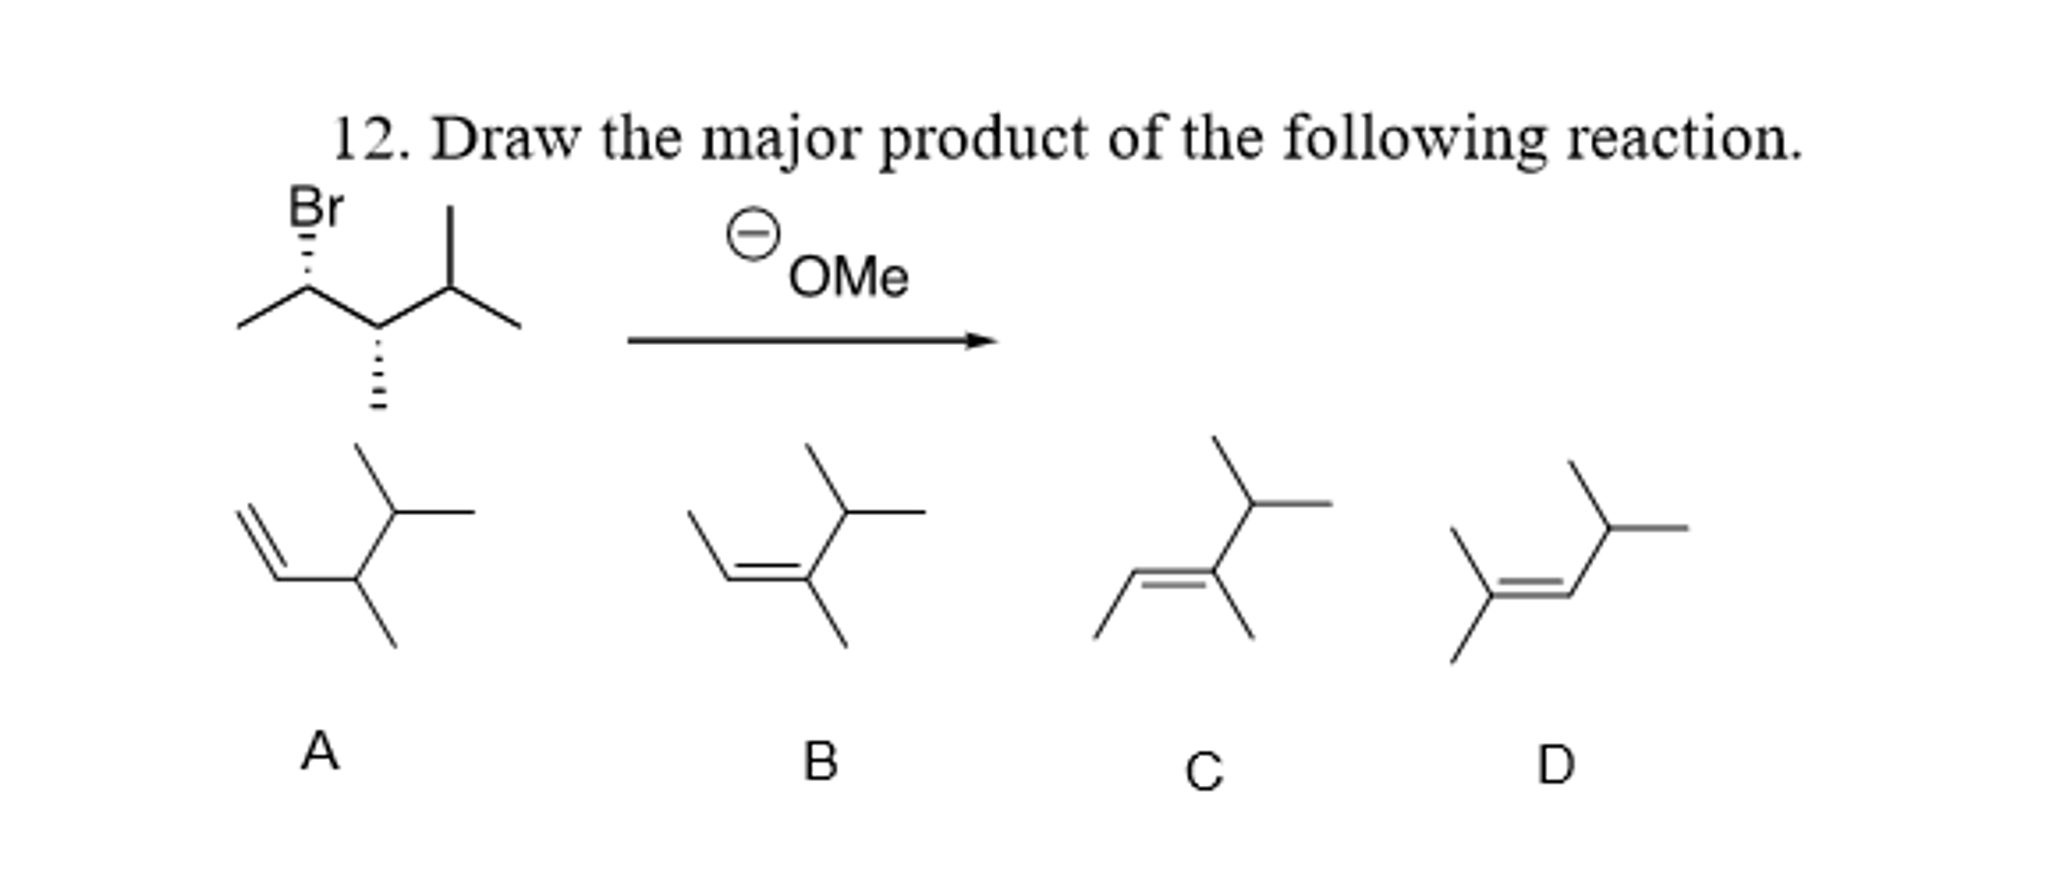 Draw the major product of the following reaction.